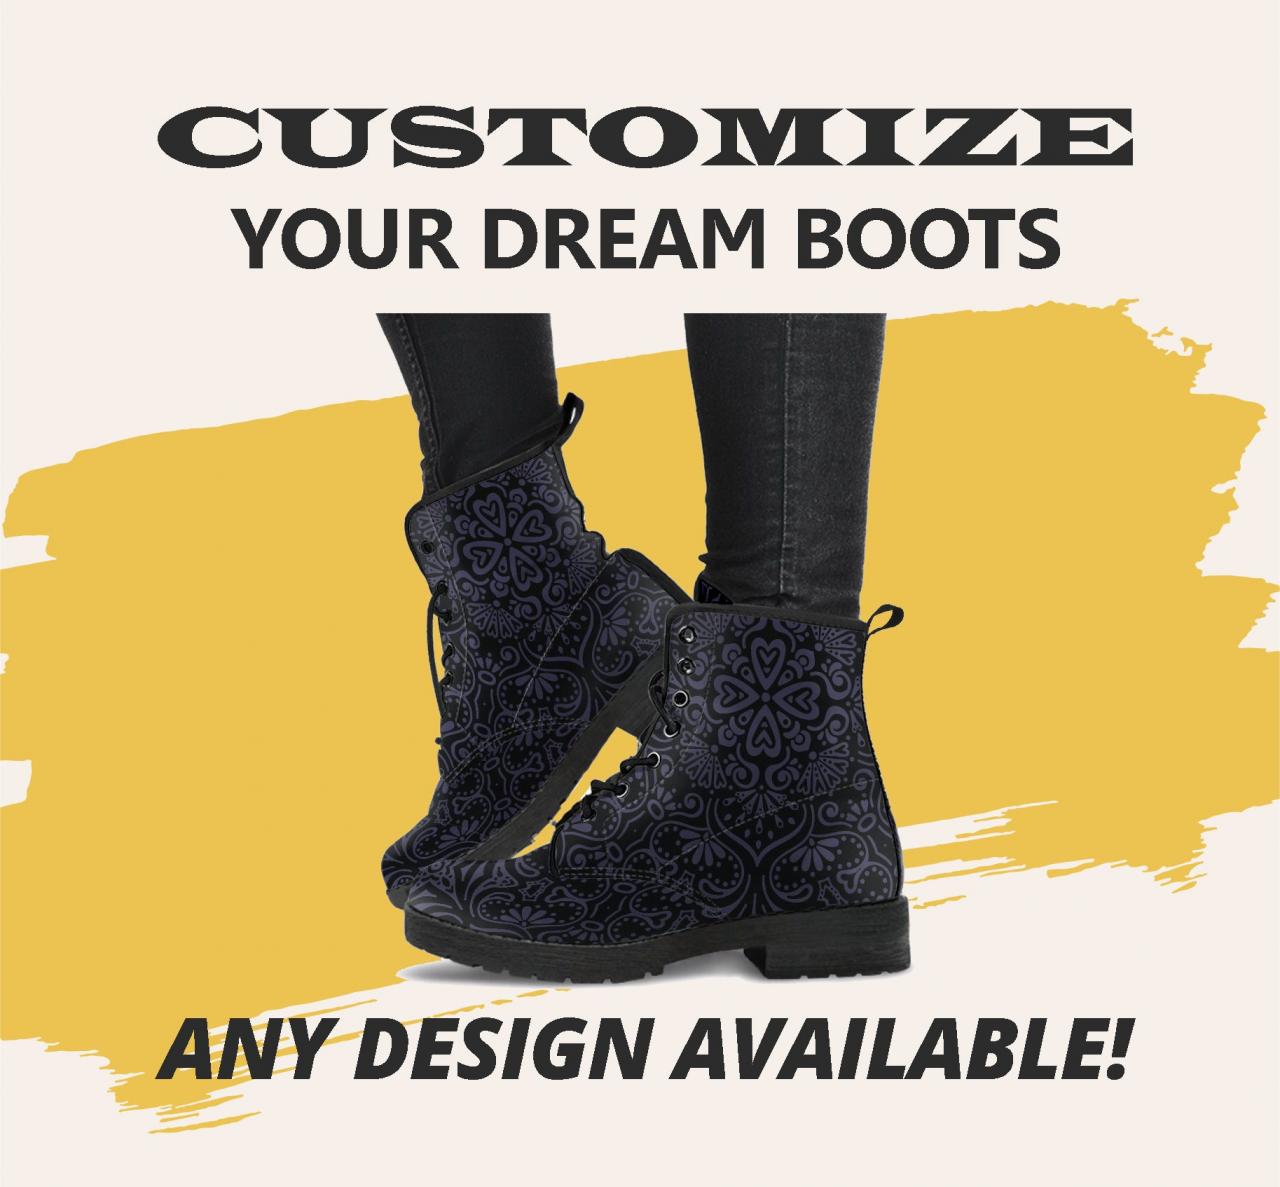 Bohemian Eclipse (black) Boots Handcrafted Women Boots, Vegan Leather Boots, Animal Friendly Boots, Women Girl Gift, Classic Boot